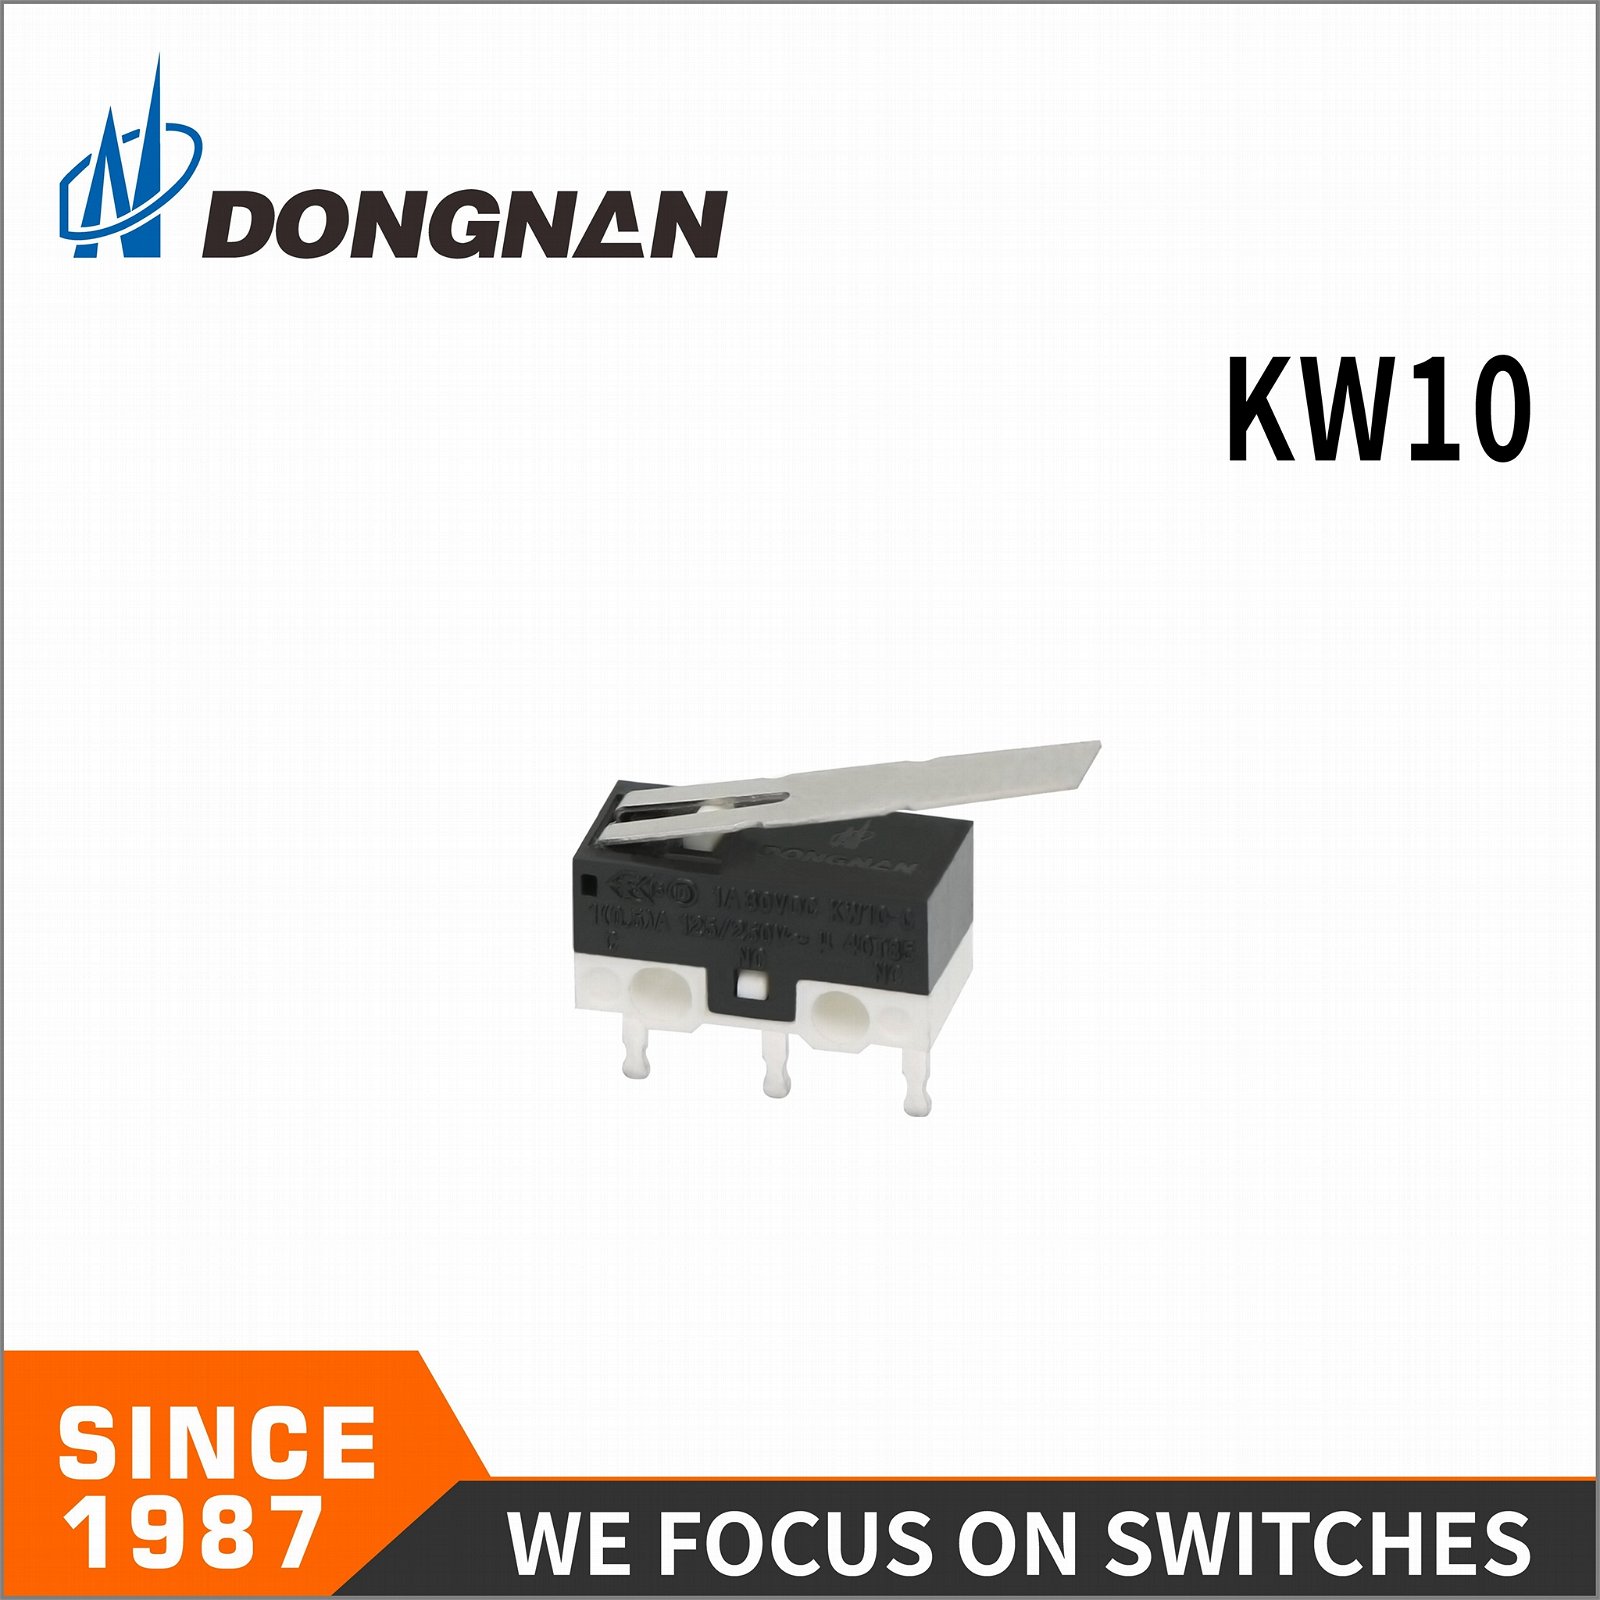 Used in Home Appliance, Audio Video Device, Computer Subminiature  Micro Switch 3